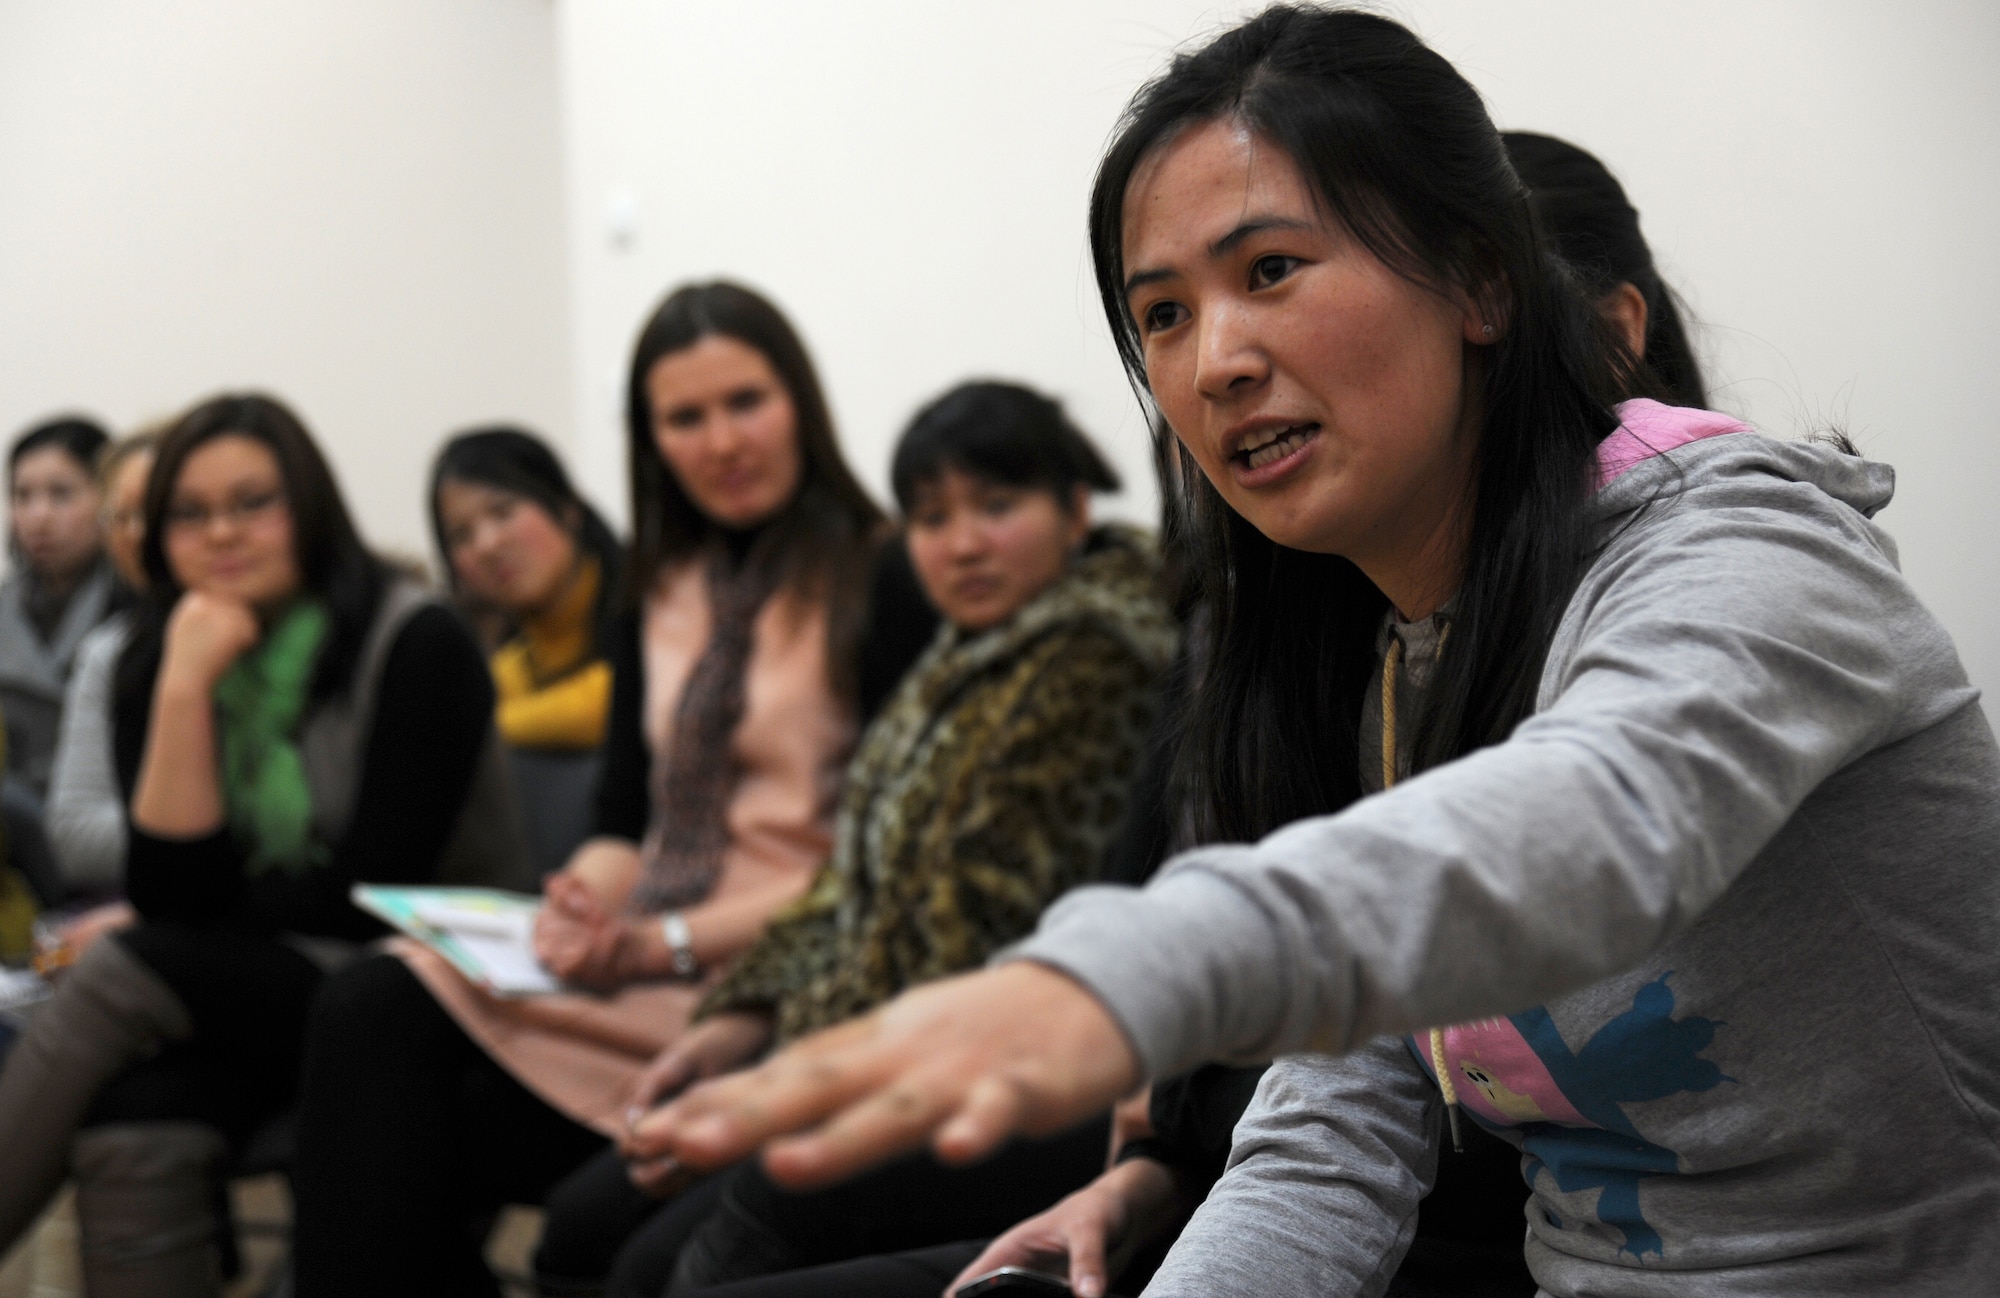 Venera Myrzabaeva, a 22-year-old Kyrgyz Republic university student, explains the cultural pressure on Kyrgyz women to marry by the age of 25 to female Airmen from the Transit Center at Manas during the Women’s Club discussion at the American Corner in Bishkek, Kyrgyzstan, Feb. 17, 2012. More than 30 female students and faculty members attended this week’s cultural exchange. Topics discussed included marriage, children, career goals and life regrets. Venera is studying linguistics at the International University of Kyrgyzstan. (U.S. Air Force photo/Master Sgt. Tracy L. DeMarco) 